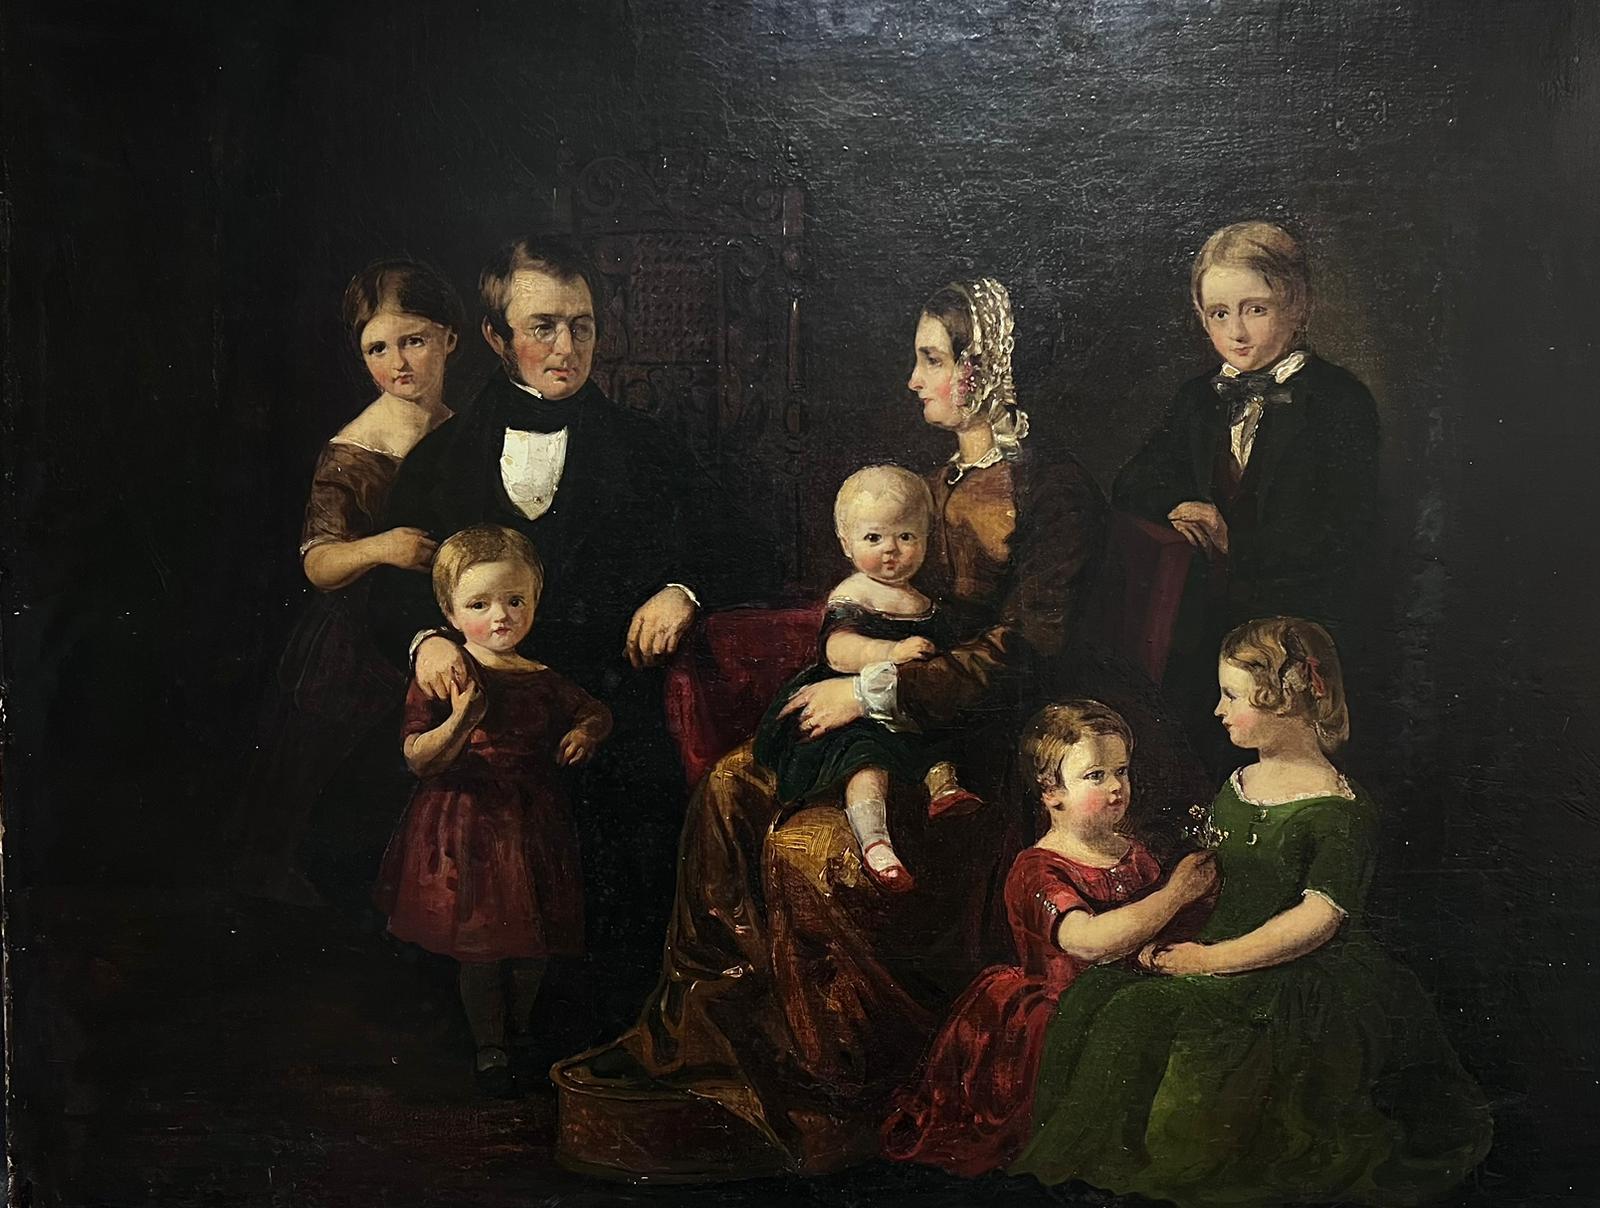 Large Victorian Family Group Portrait of 8 Family Members in Room, oil painting